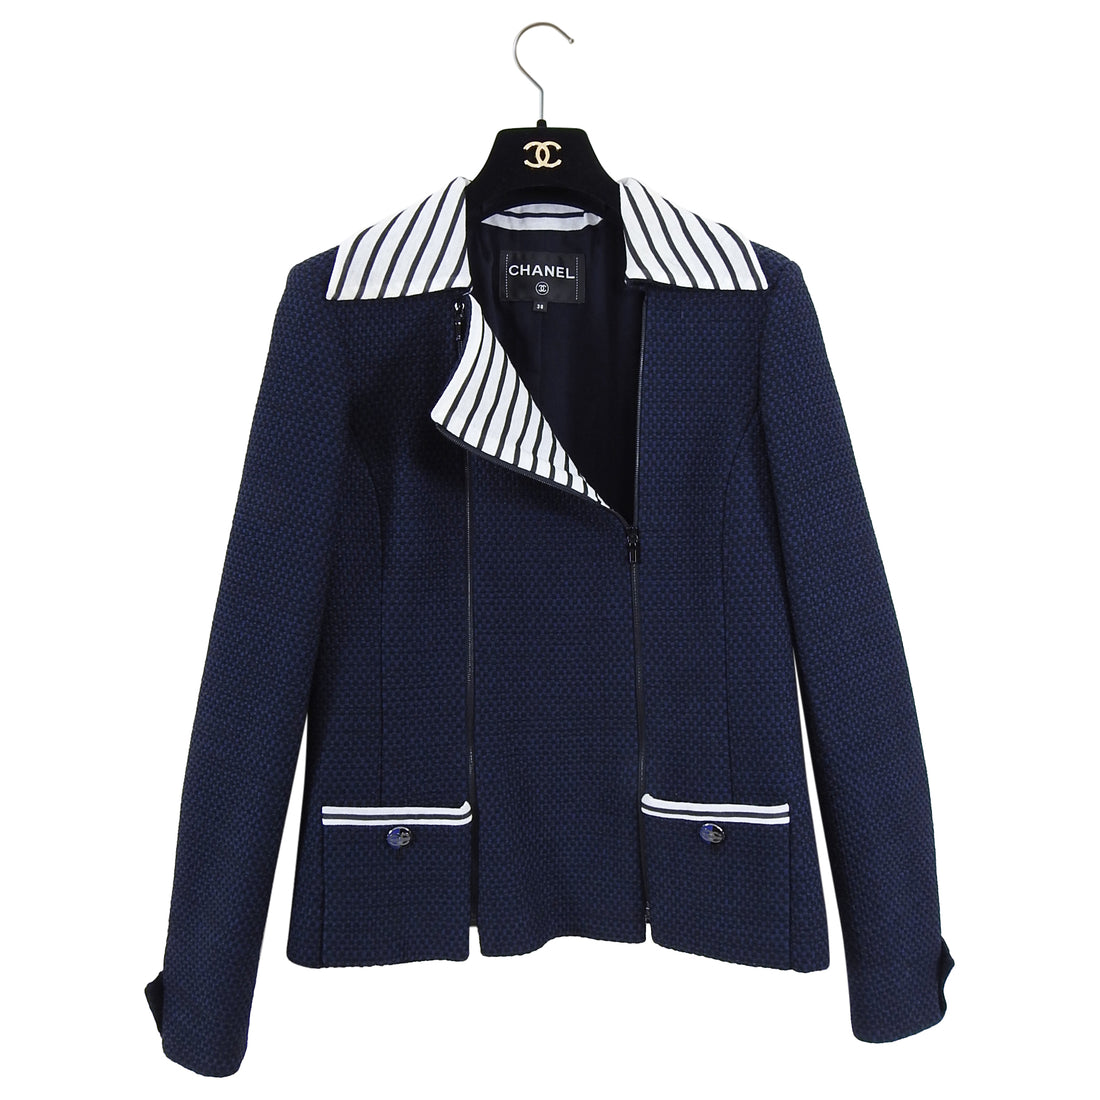 Chanel Jacket, FR38 - Huntessa Luxury Online Consignment Boutique